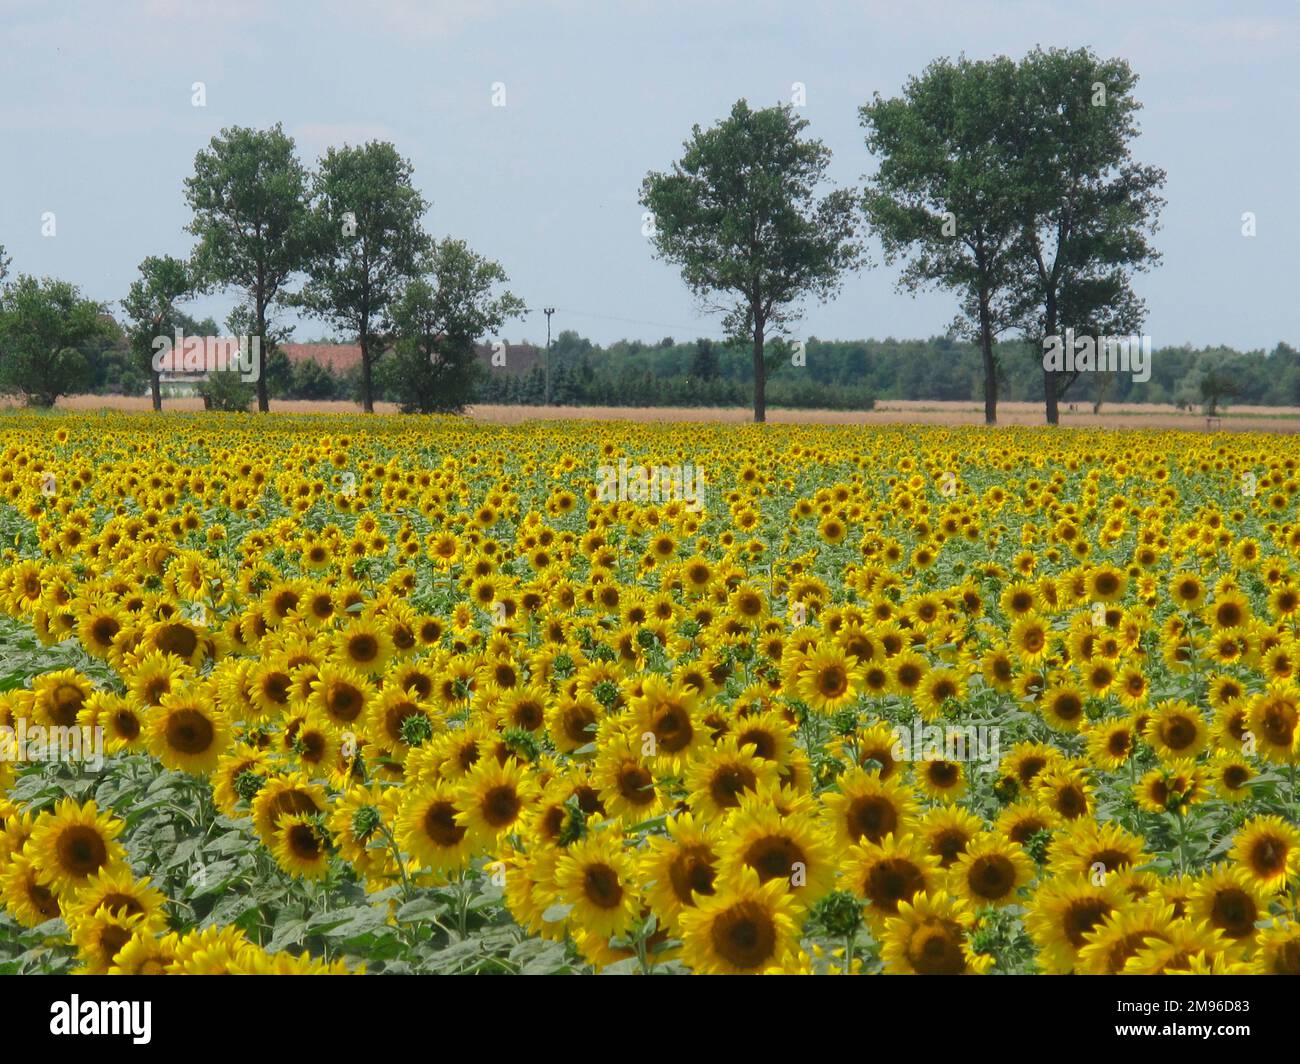 View across a sunflower field near the town of Riesa in the state of Saxony, Germany. Stock Photo